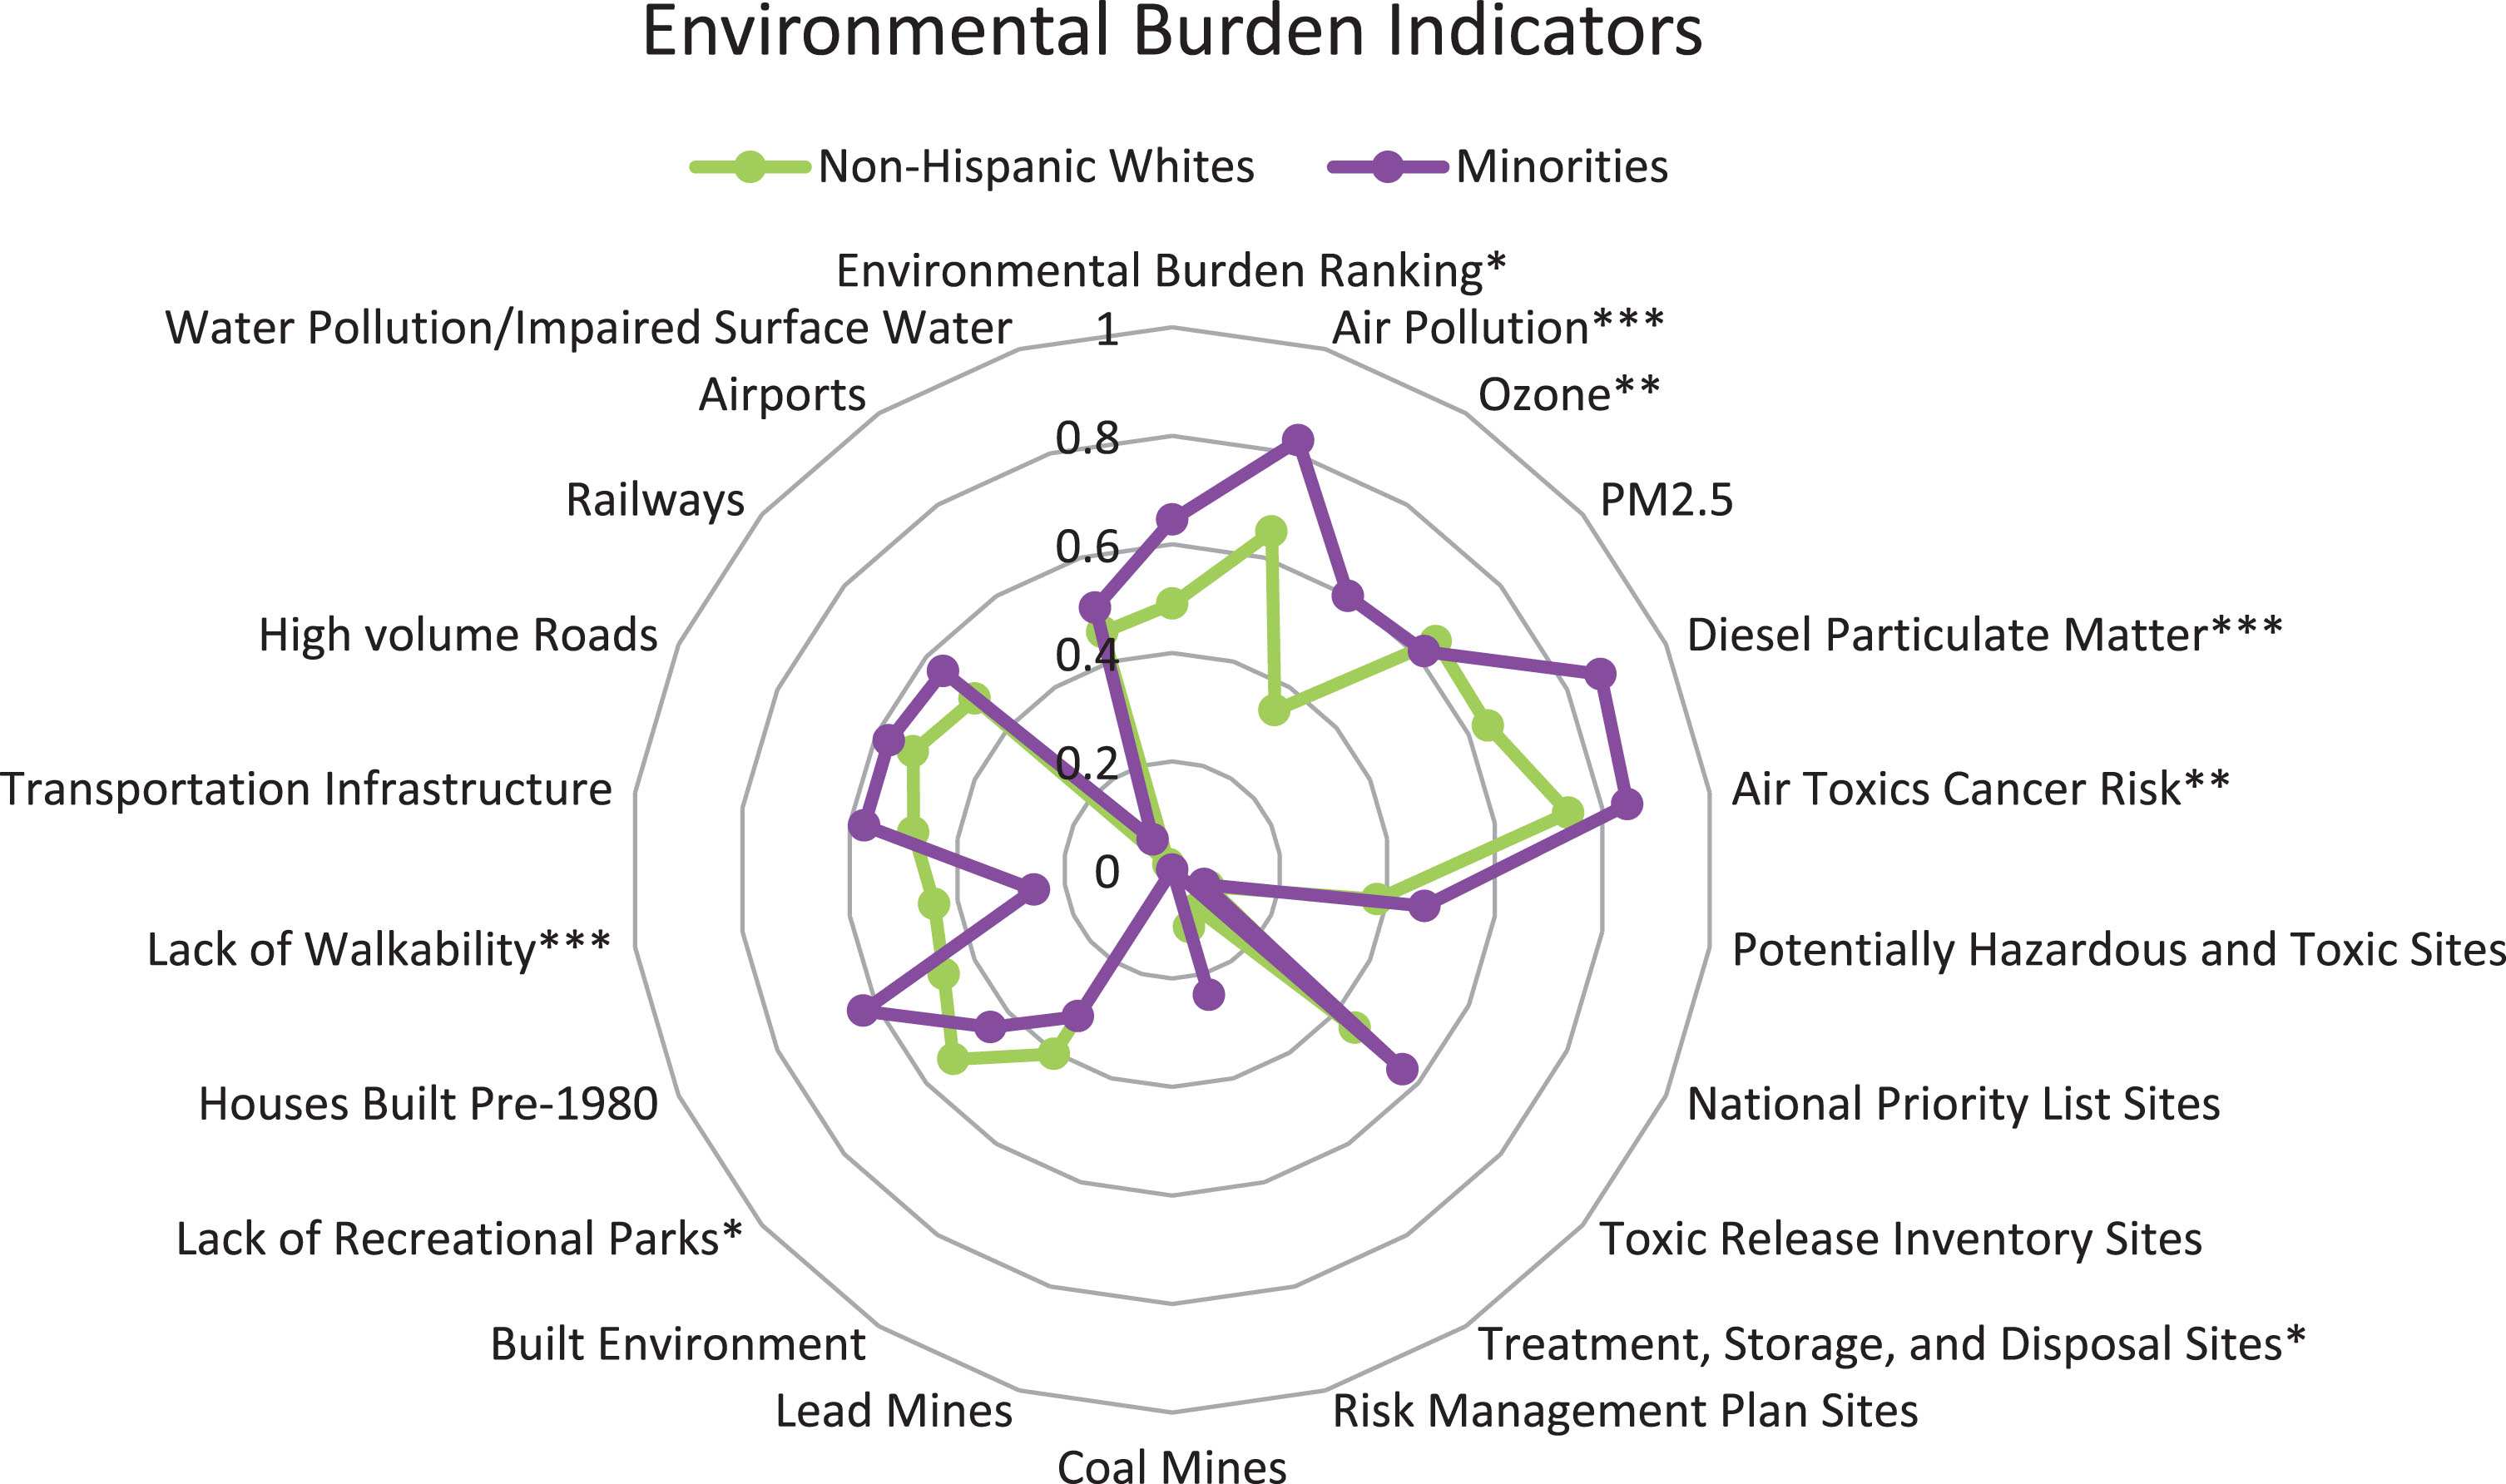 Figure portrays the mean values of all Environmental Burden indicators by race/ethnicity. Minority participants had significantly higher ranking for several variables compared to non-Hispanic white participants, indicating greater deprivation in these geographic areas: overall environmental burden ranking, air pollution, ozone, diesel particular matter, air toxics cancer risk, treatment, storage, and disposal sites, lack of recreational parks, and lack of walkability. Significance is represented by the asterisks (*p < 0.05, ** p < 0.01, *** p < 0.001).